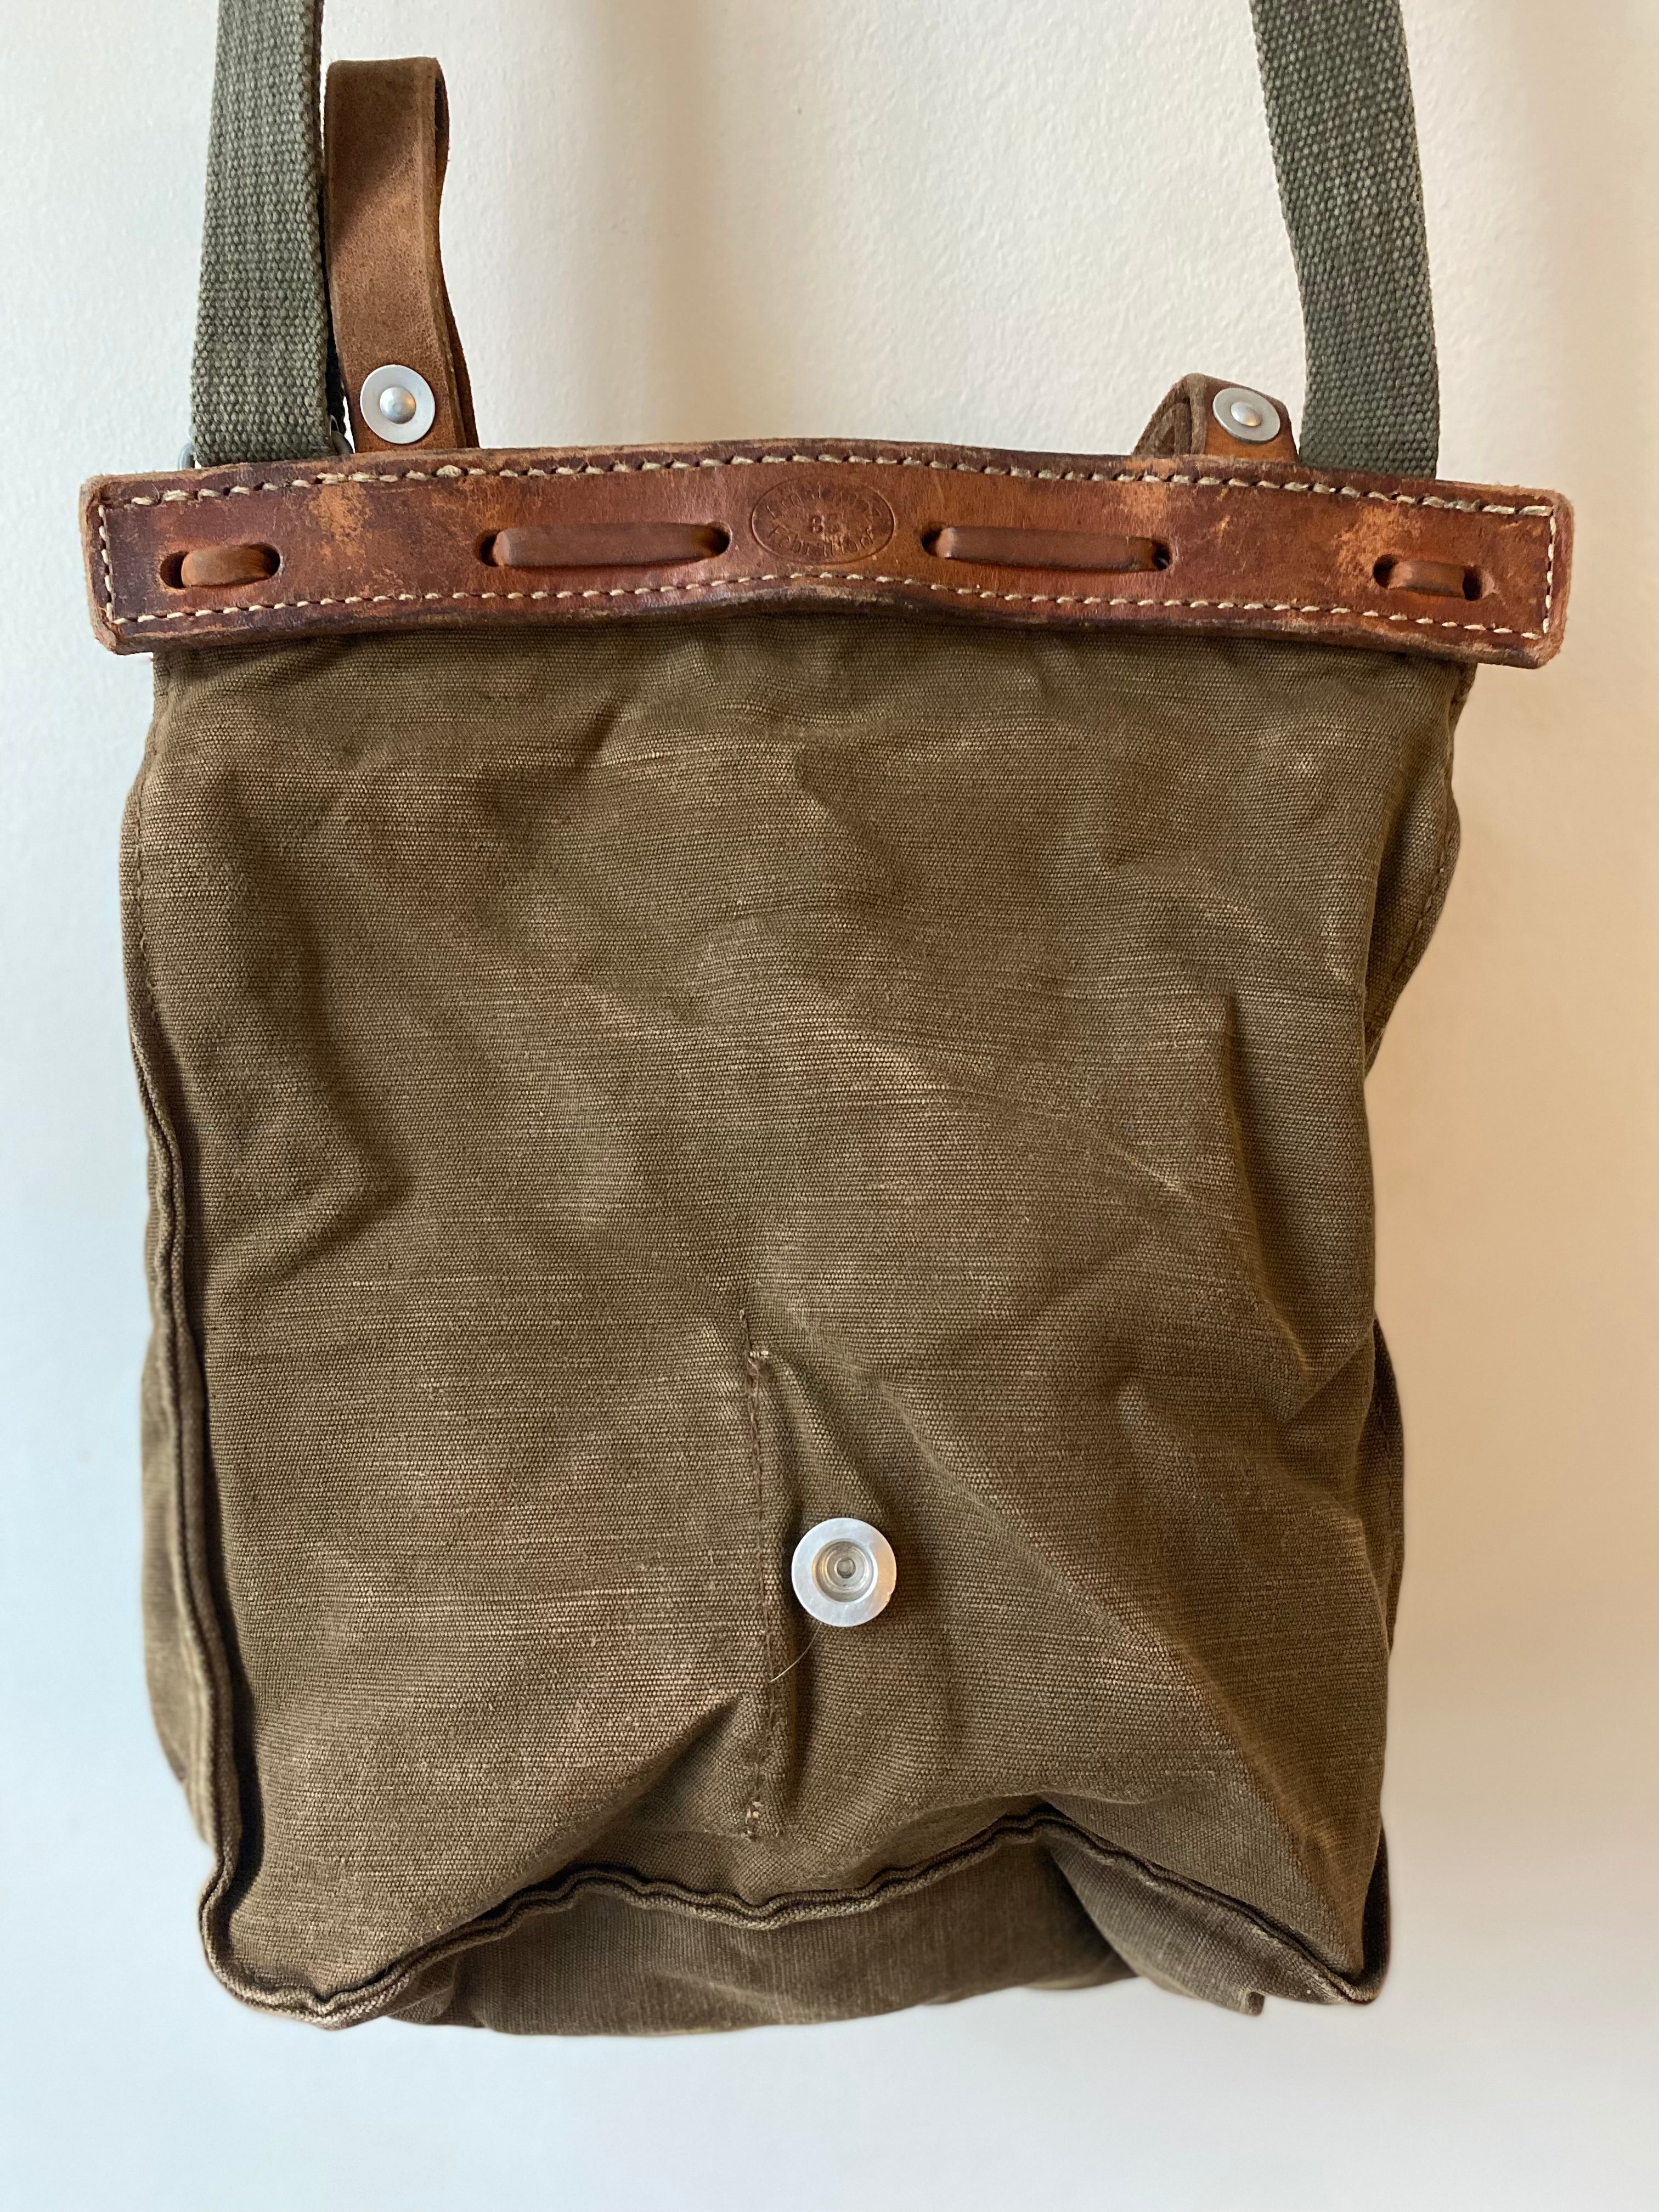 VINTAGE ORVIS FLY FISHING TACKLE BAG CANVAS & LEATHER FIELD SATCHEL